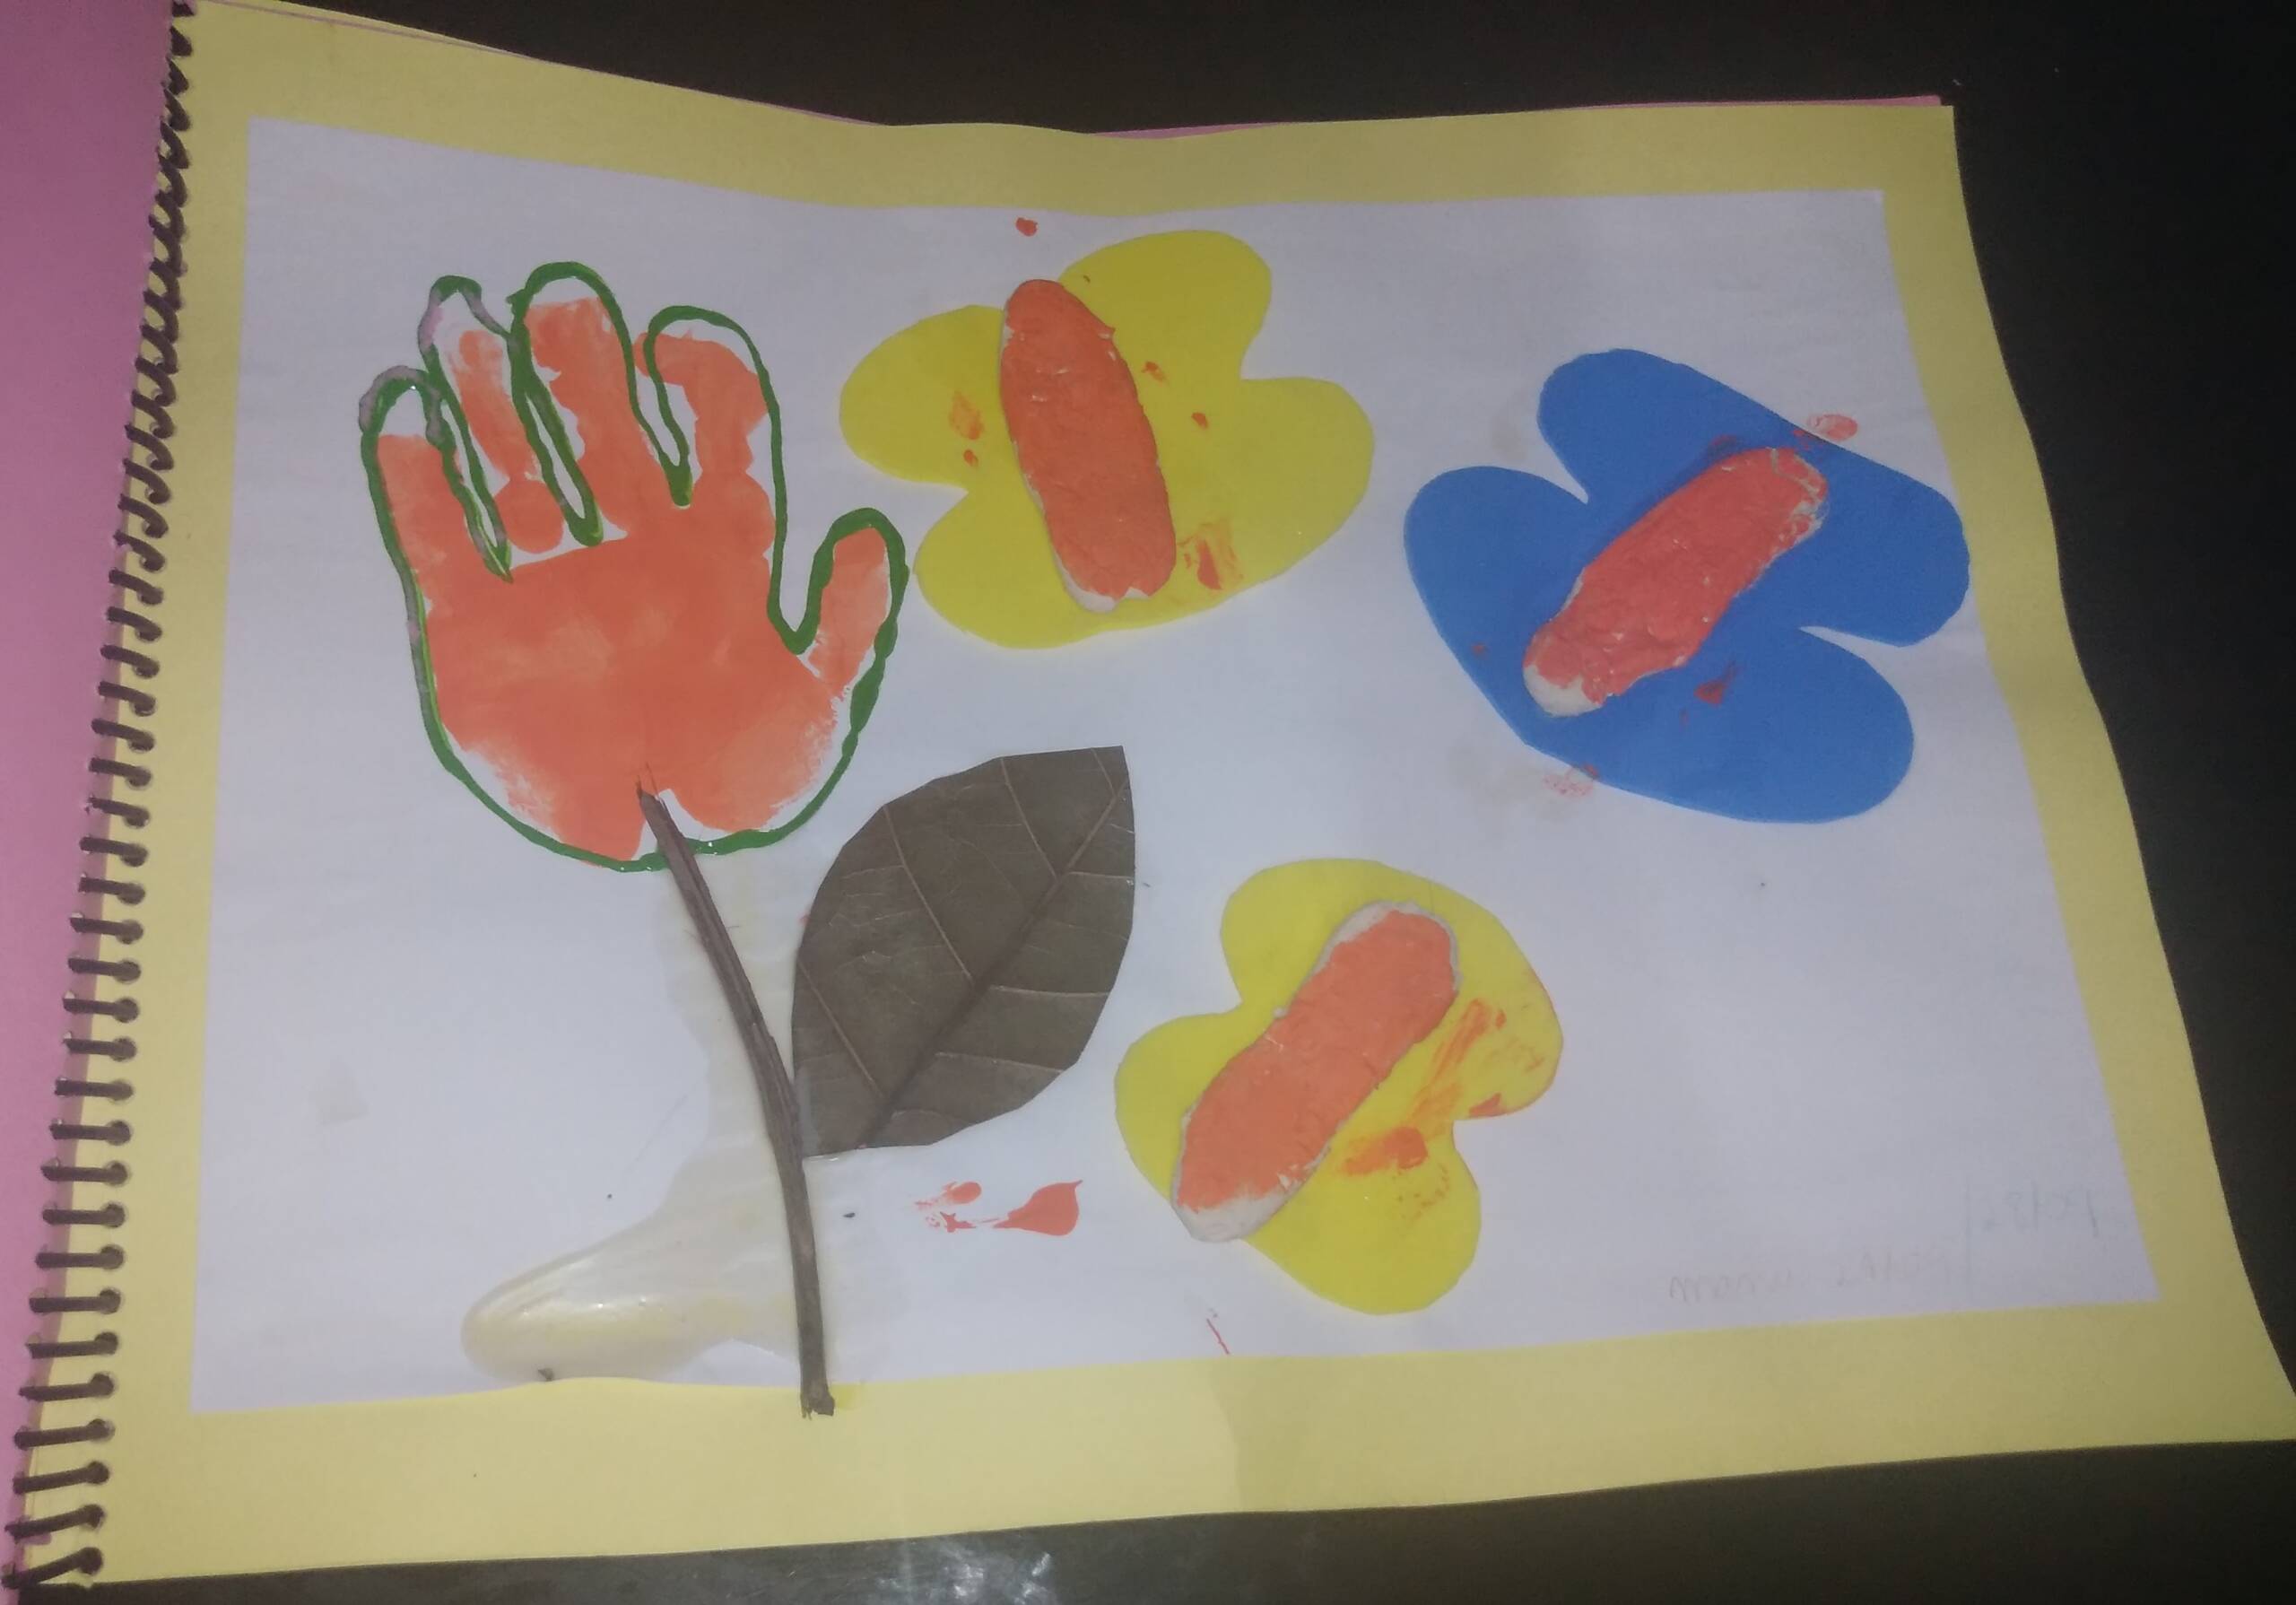 olored image of a sheet of paper containing the painting of the child left hand and underneath a dry branch with a dry leaf representing a flower made in the shape of a hand. Next to it are three colorful butterflies made with modeling clay.